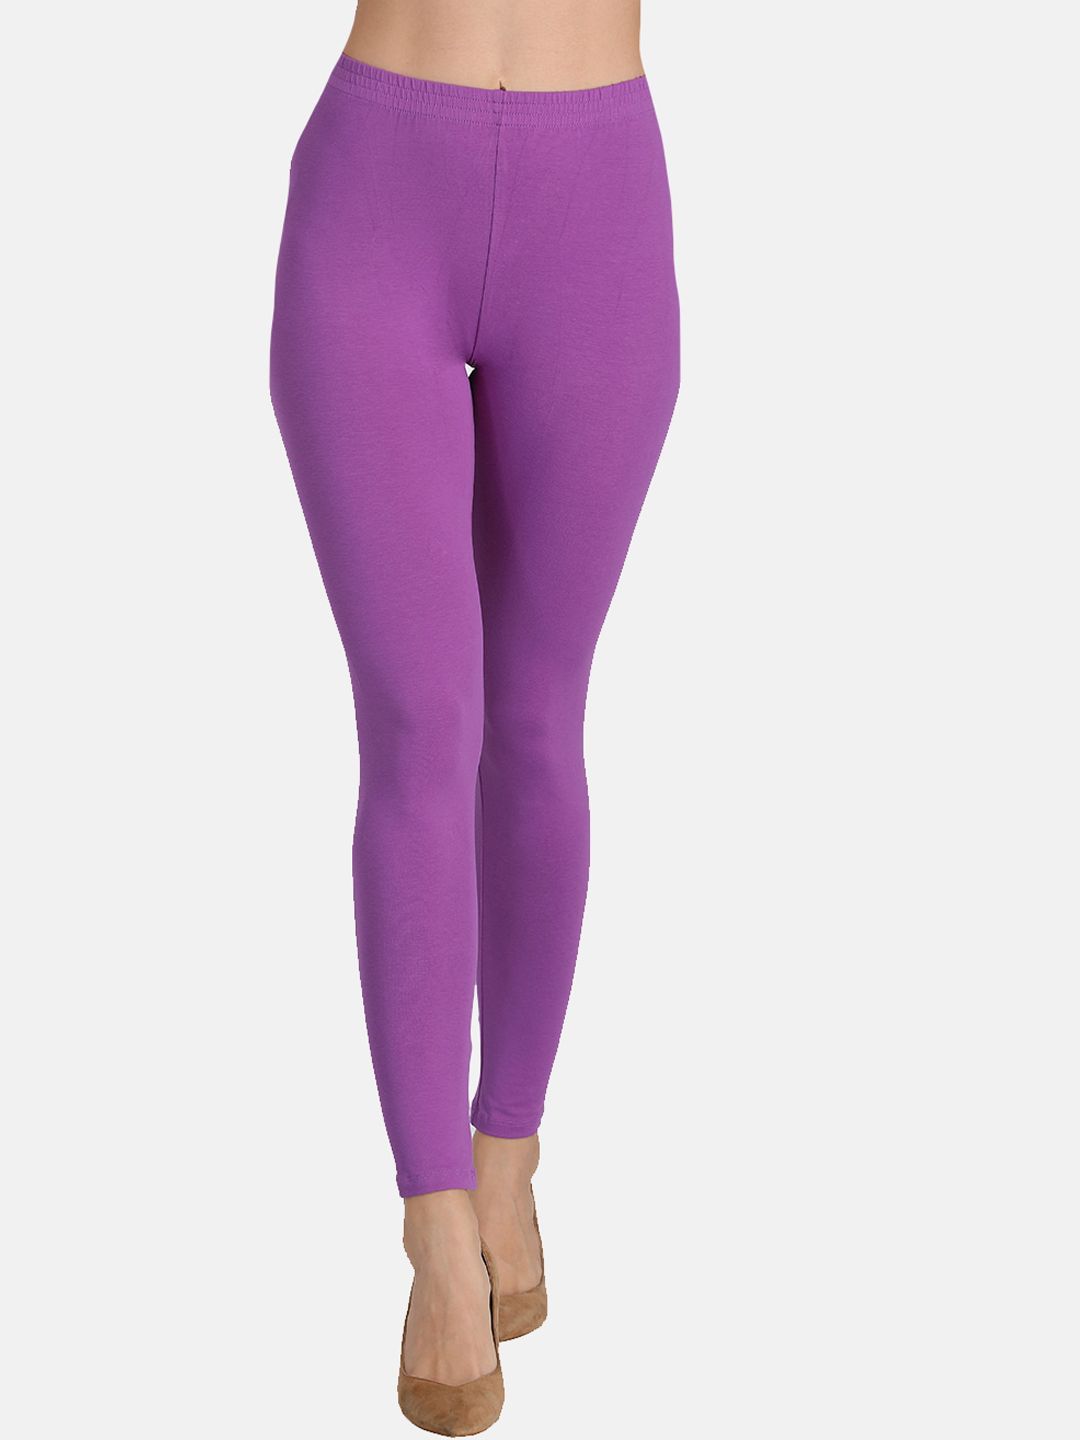 GROVERSONS Paris Beauty Women Lavender Solid Cotton Leggings Price in India